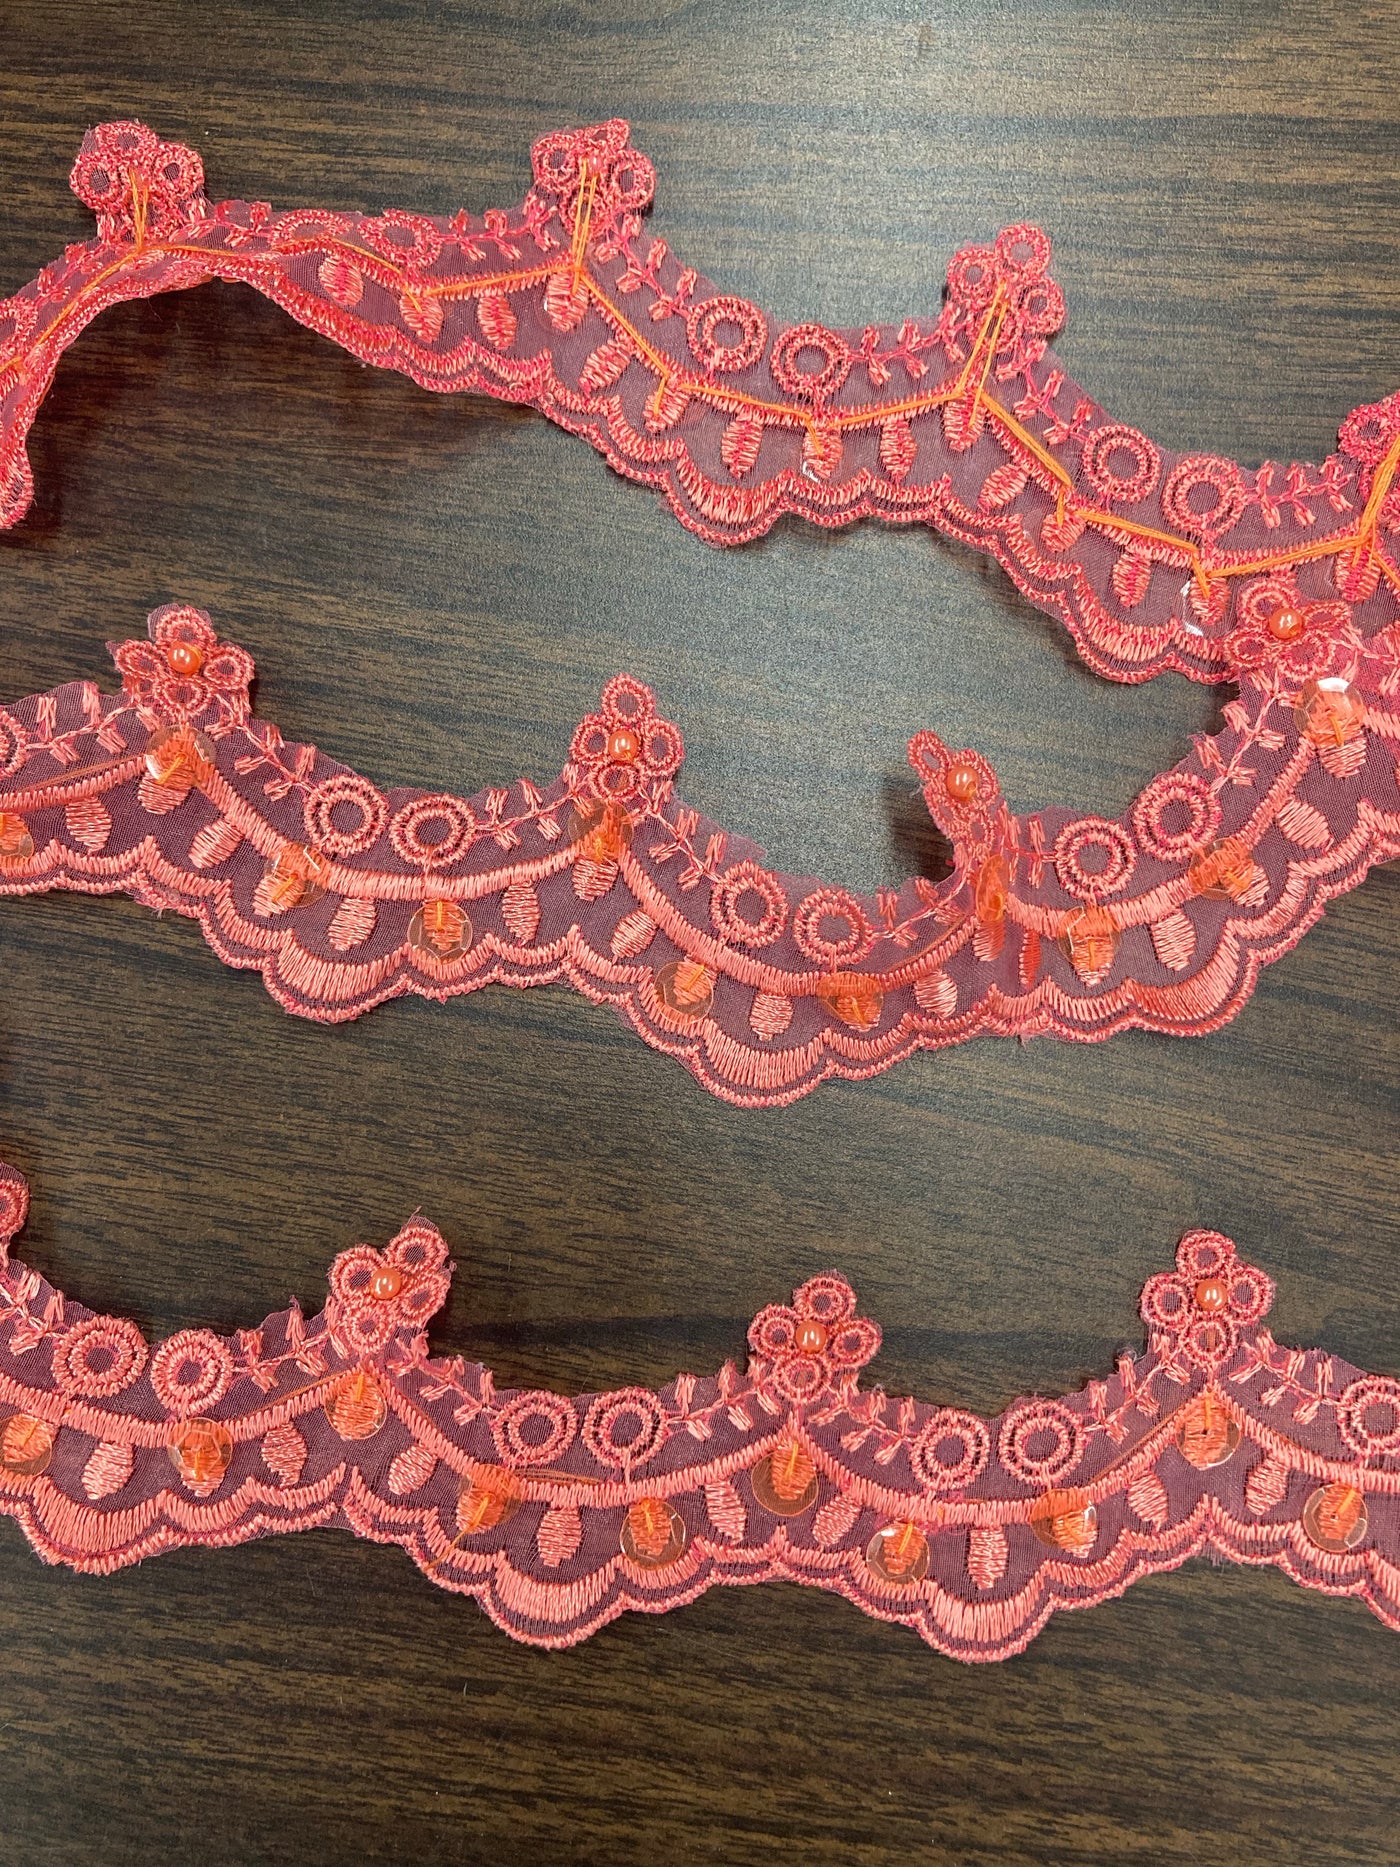 Beaded Coral Lace Trim Embroidered on 100% Polyester Organza . Large Arch Scalloped Trim. Formal Trim. Perfect for Edging and Gowns. Sold by the Yard. Lace Usa